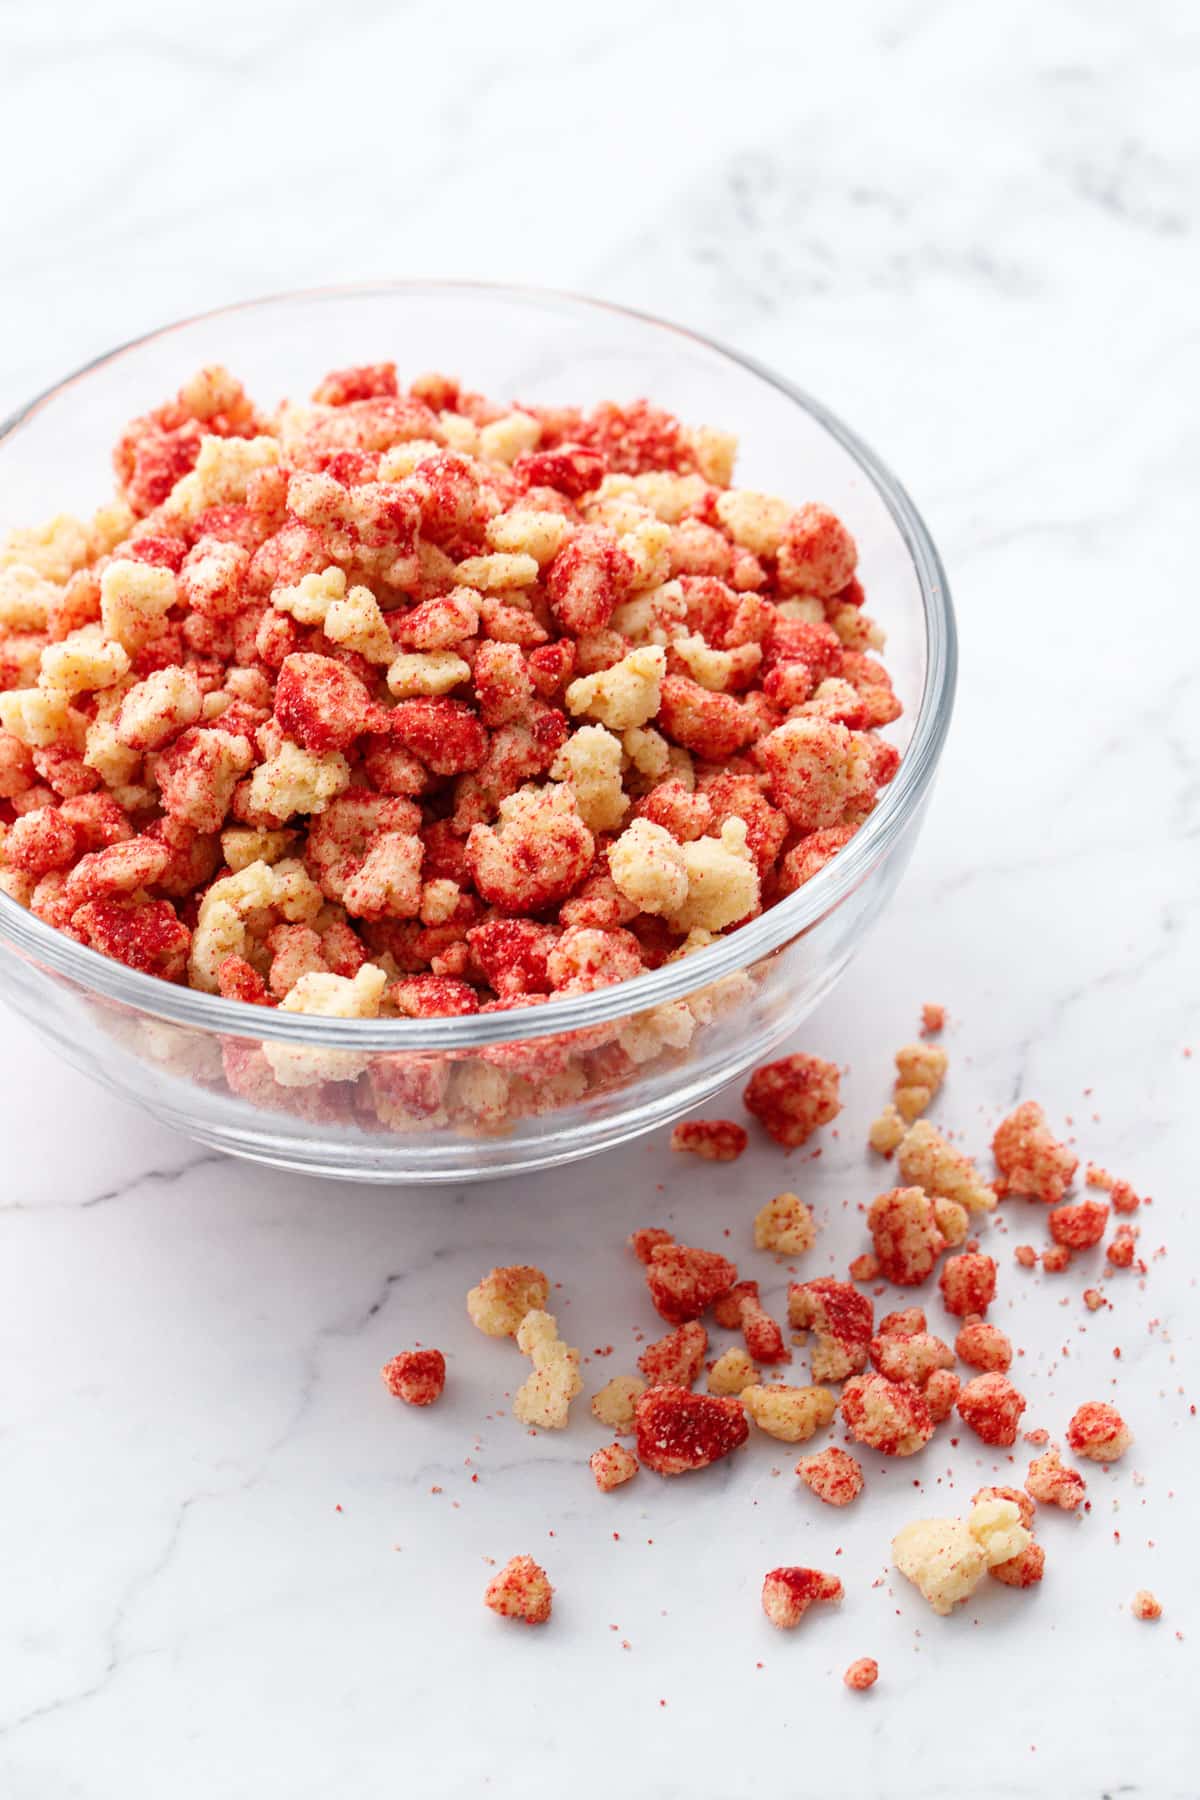 Glass bowl of Strawberry Shortcake Crunch Topping on a marble background, with a few crumbs scattered alongside the bowl.